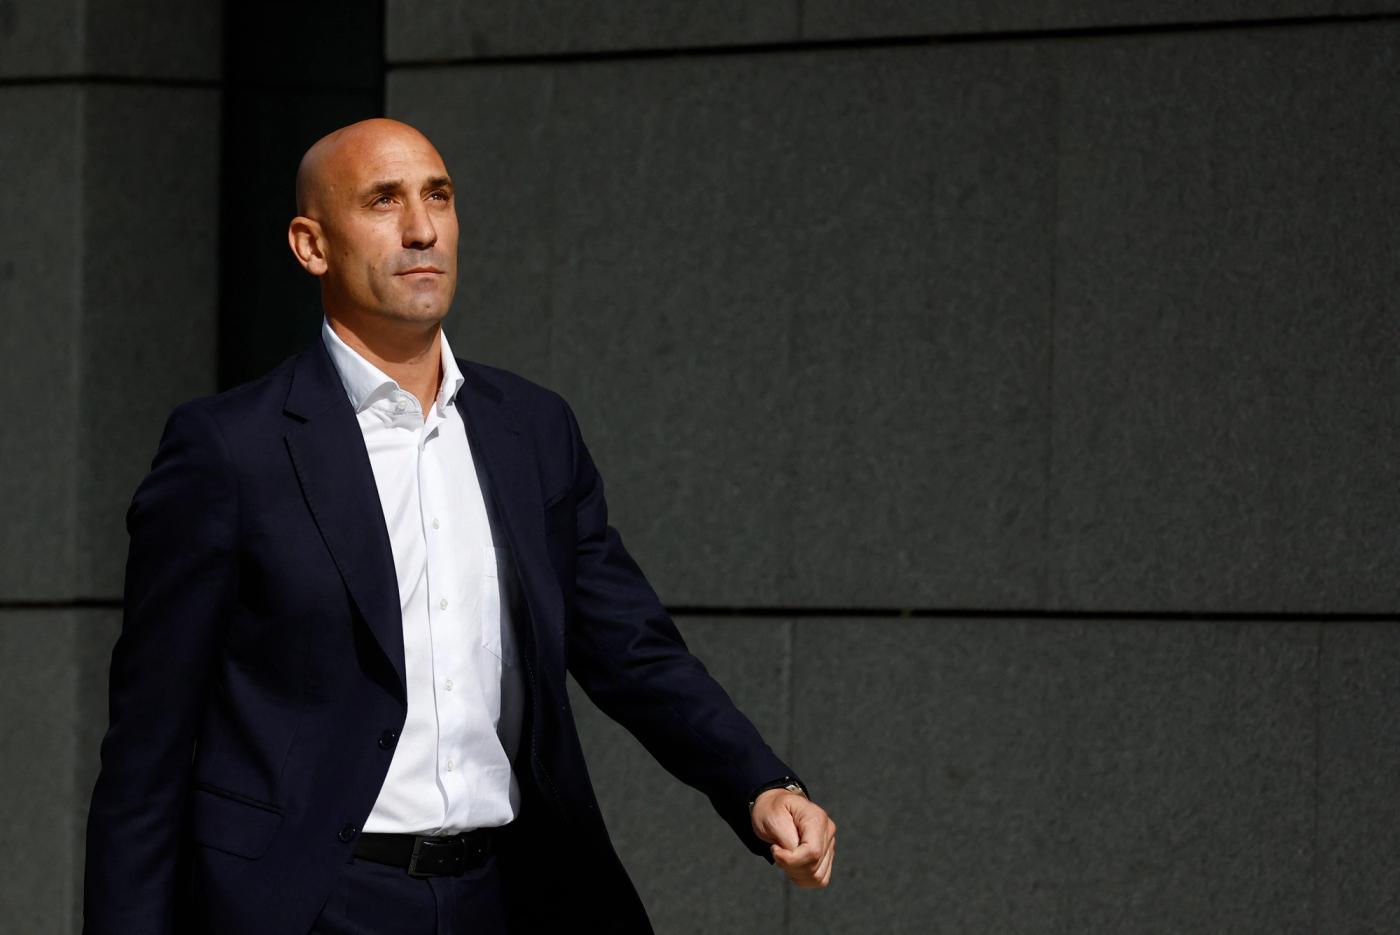 Former president of the Royal Spanish Football Federation Luis Rubiales arrives at the high court in Madrid, Spain - September 15, 2023 REUTERS/Susana Vera/File photo